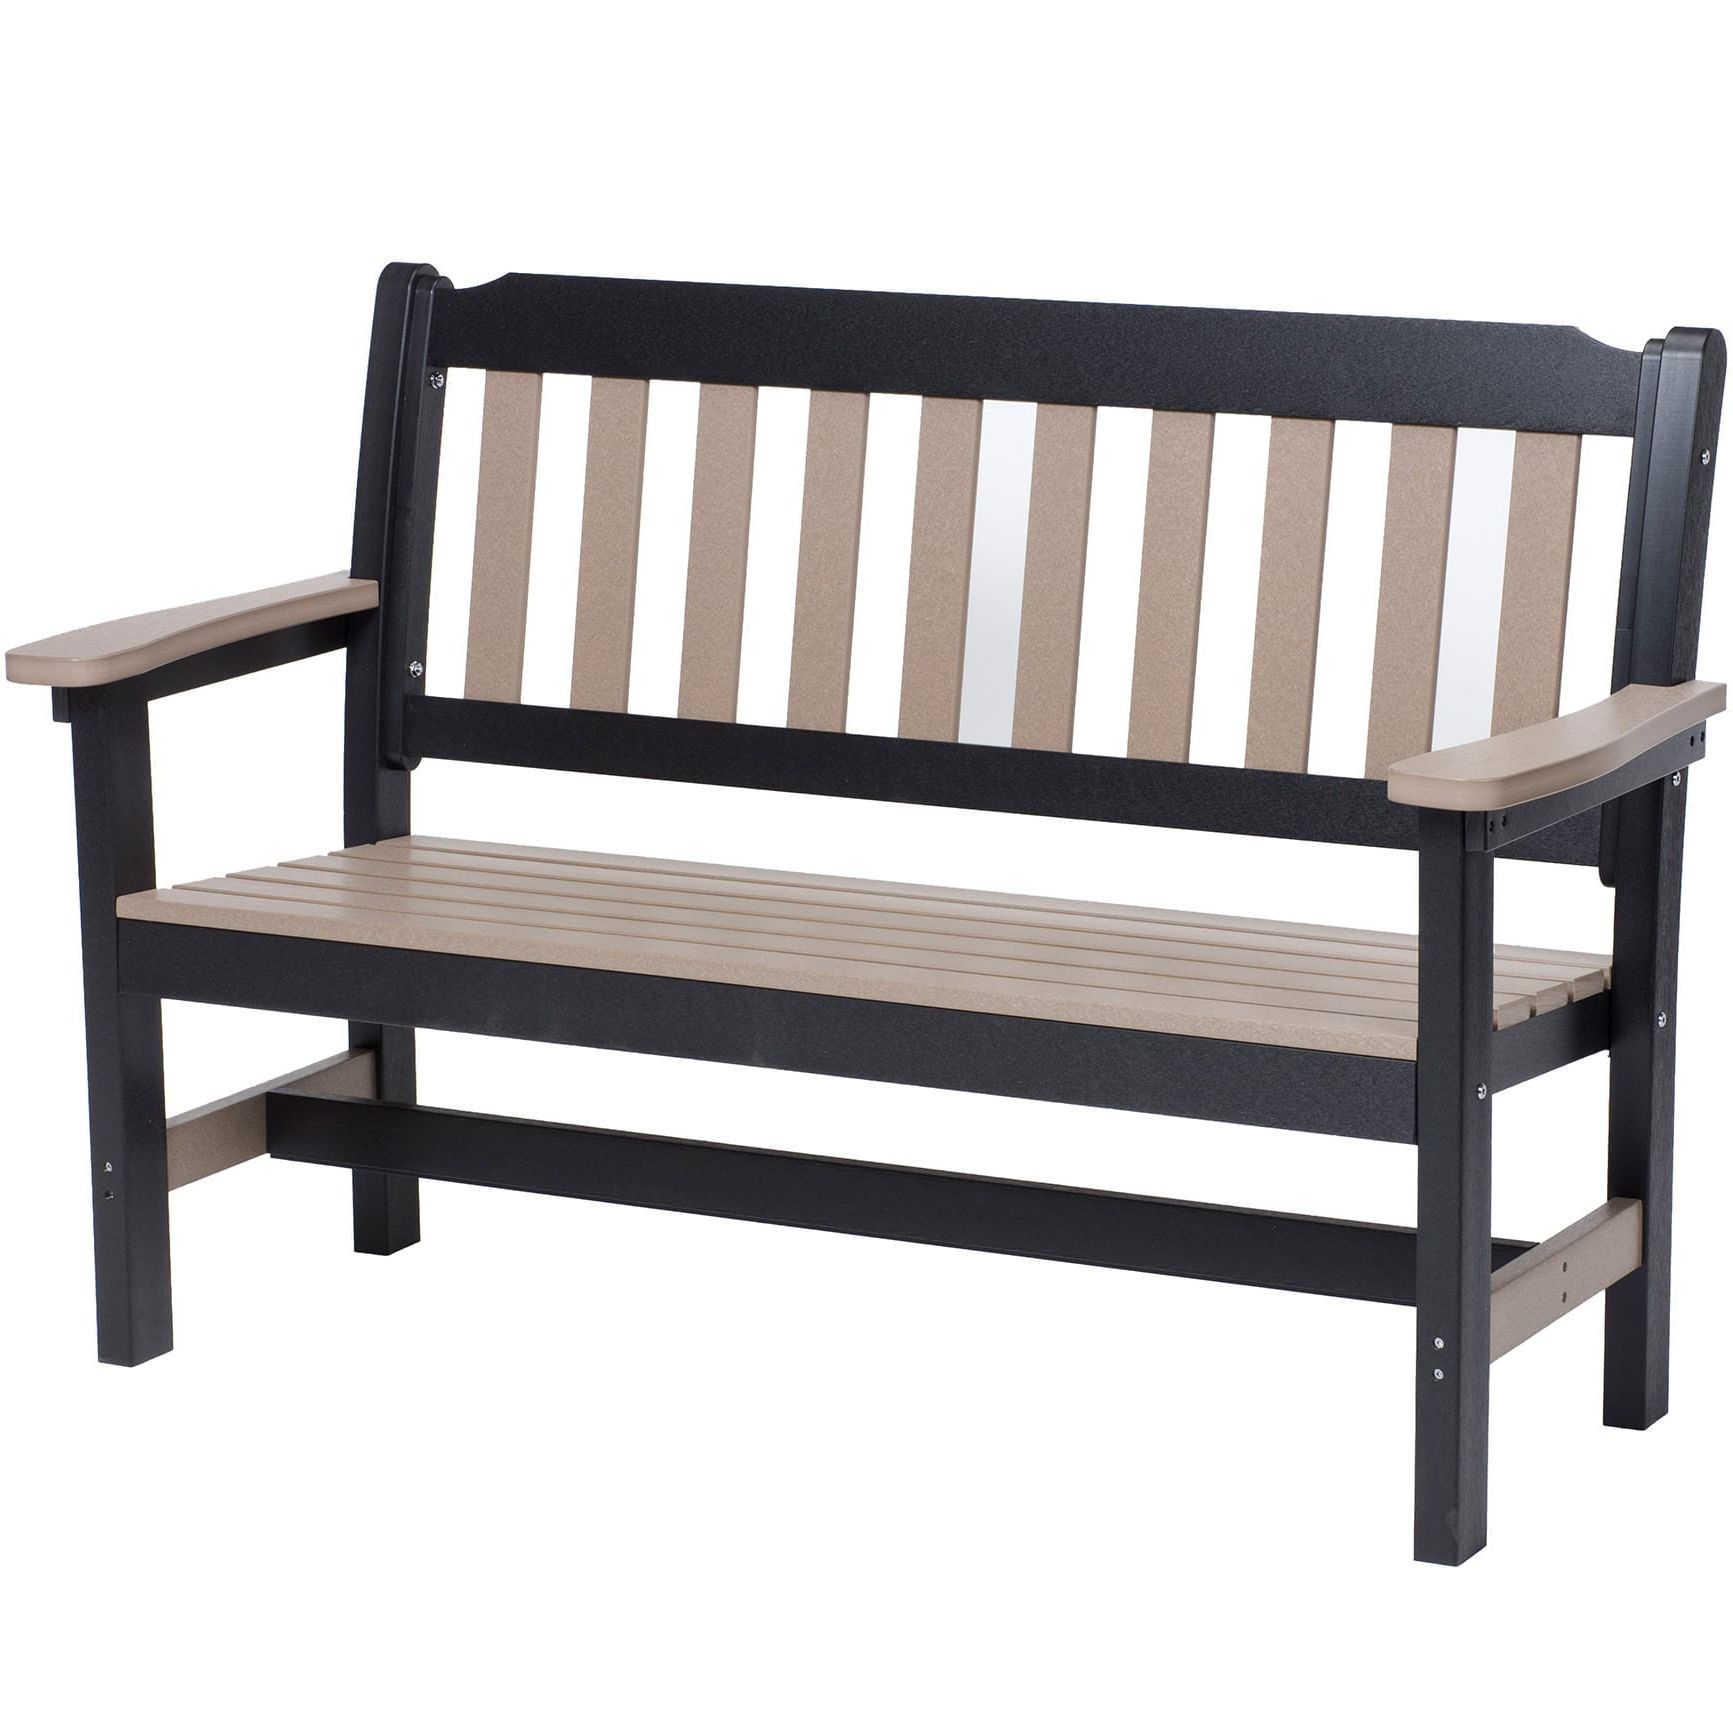 Widely Used Monnatural Wood Outdoor Folding Tables With Regard To Garden Bench – Yoder's Home Furnishings (View 7 of 15)